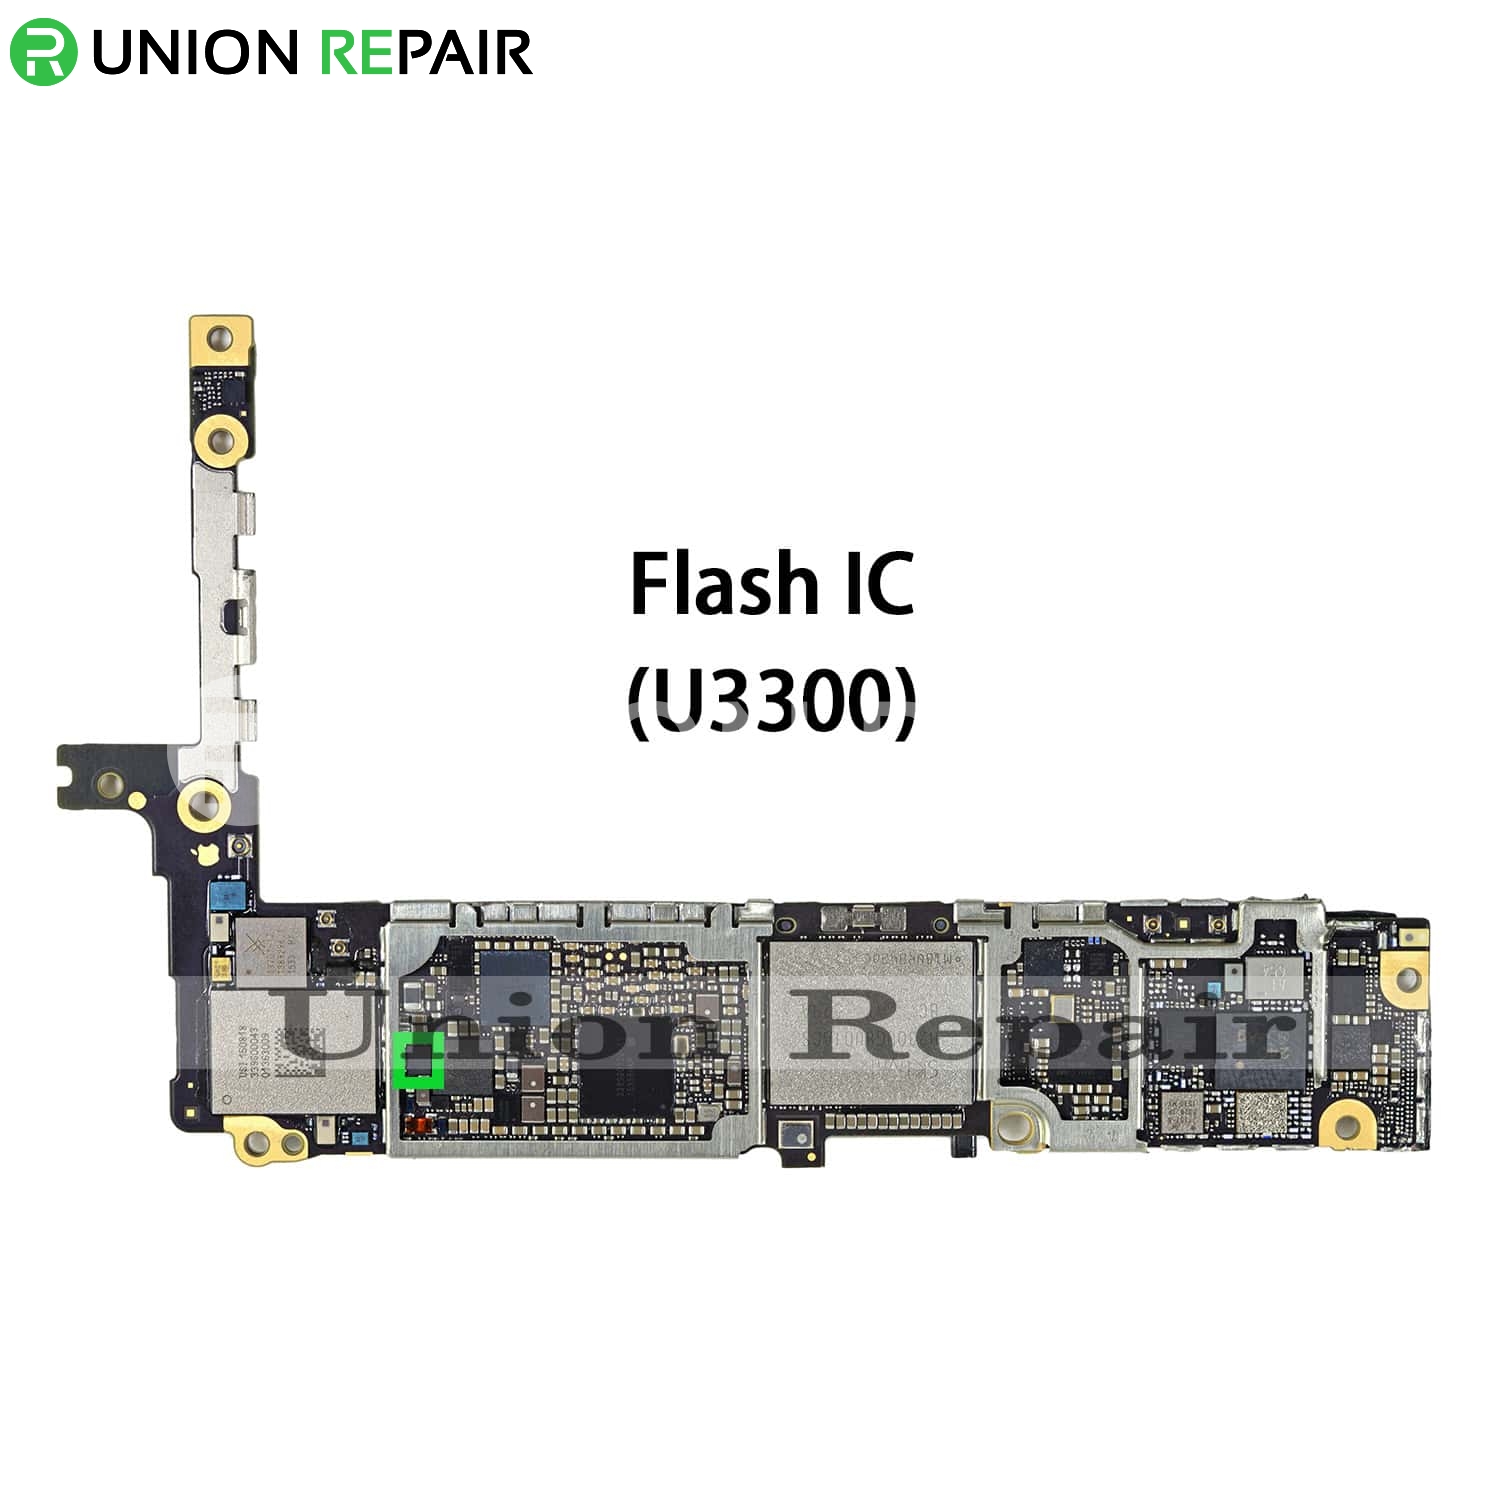 Replacement for iPhone 6/6 Plus/6S/6S Plus Camera Flash Light Control IC